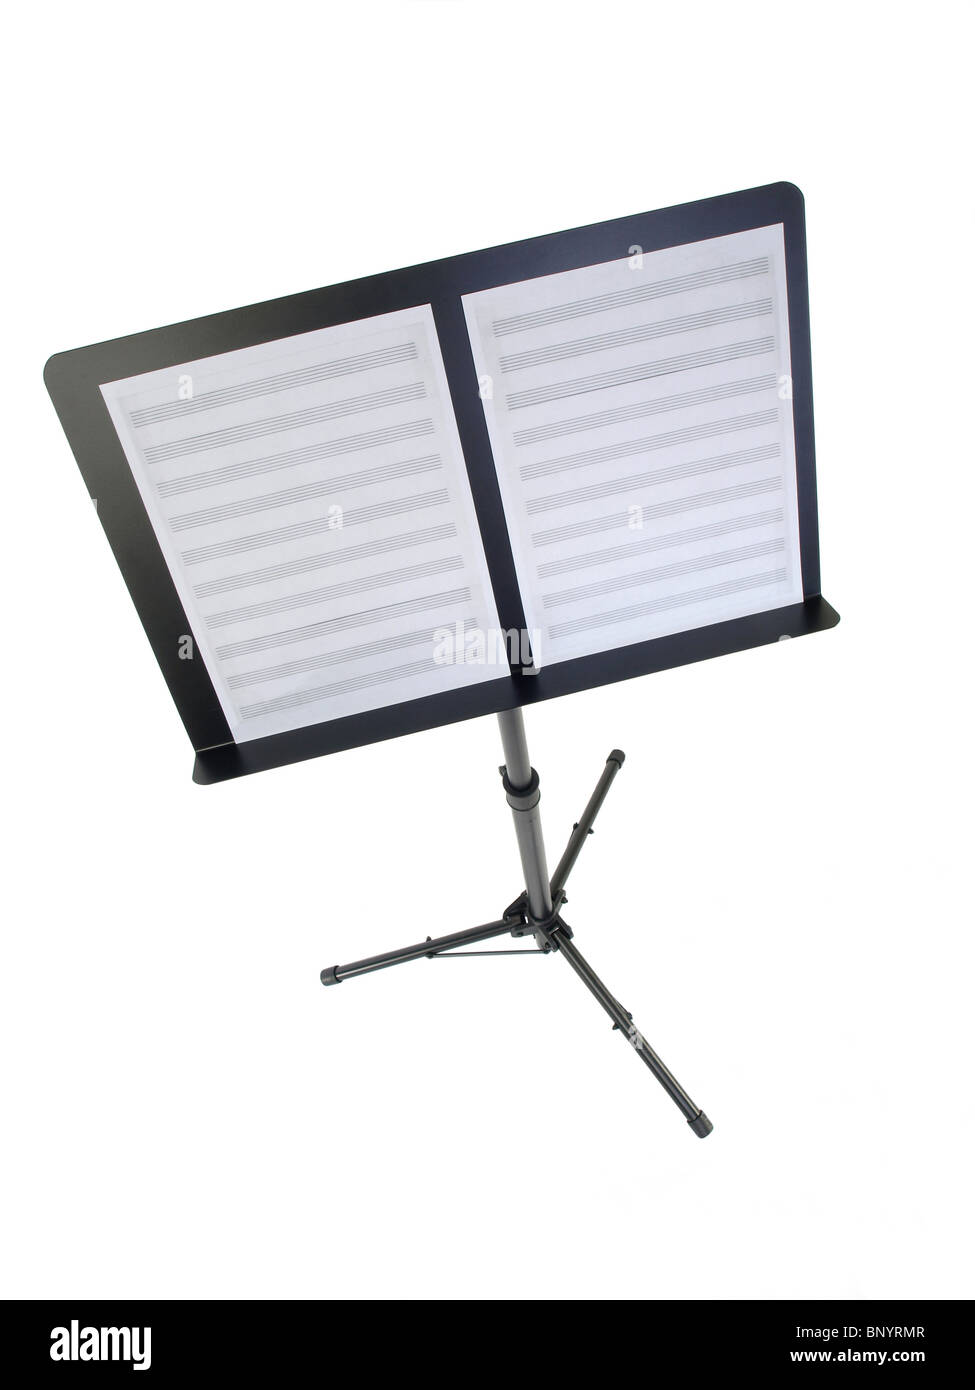 Music Stand with blank sheet music paper. Stock Photo